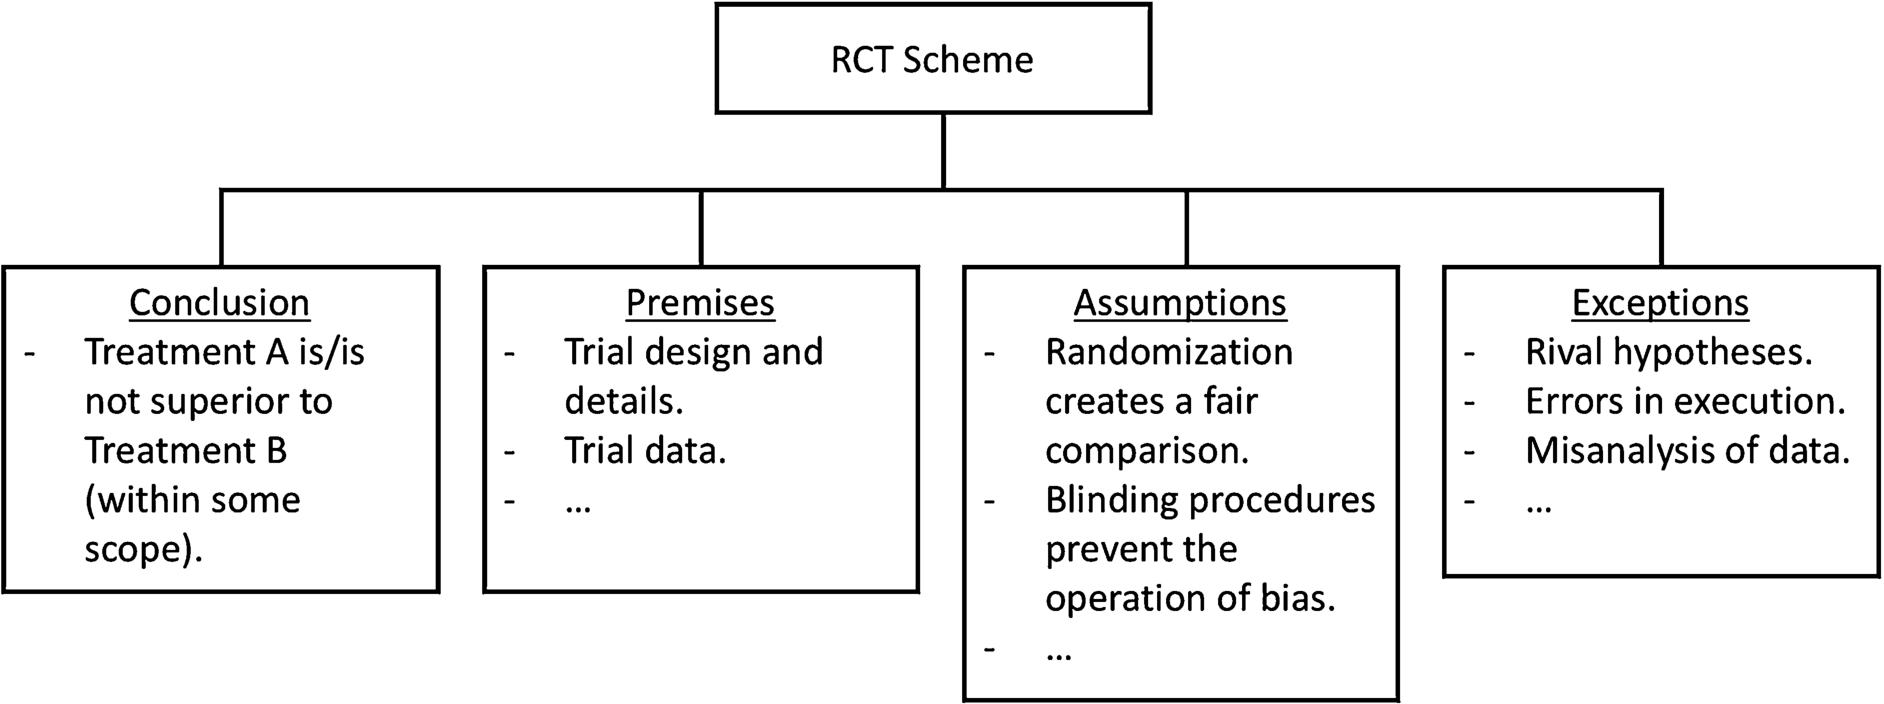 A scheme definition for the RCT Scheme, to enable adding it as a new AIF Form.